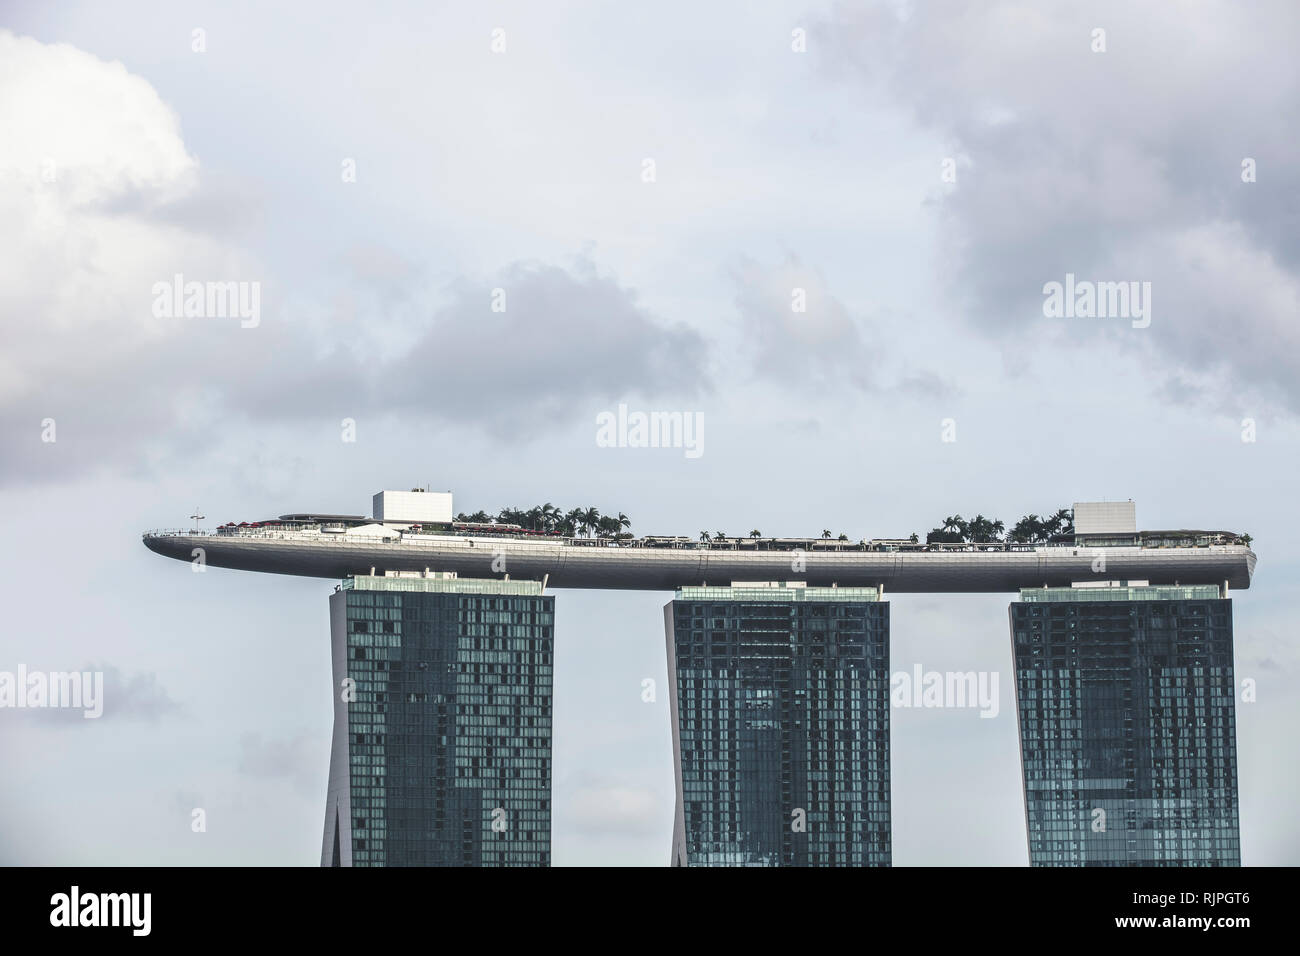 Singapore Marina Bay Sands Hotel and Esplanade theatres on the bay architectural close up details aerial view during clear sky day time Stock Photo